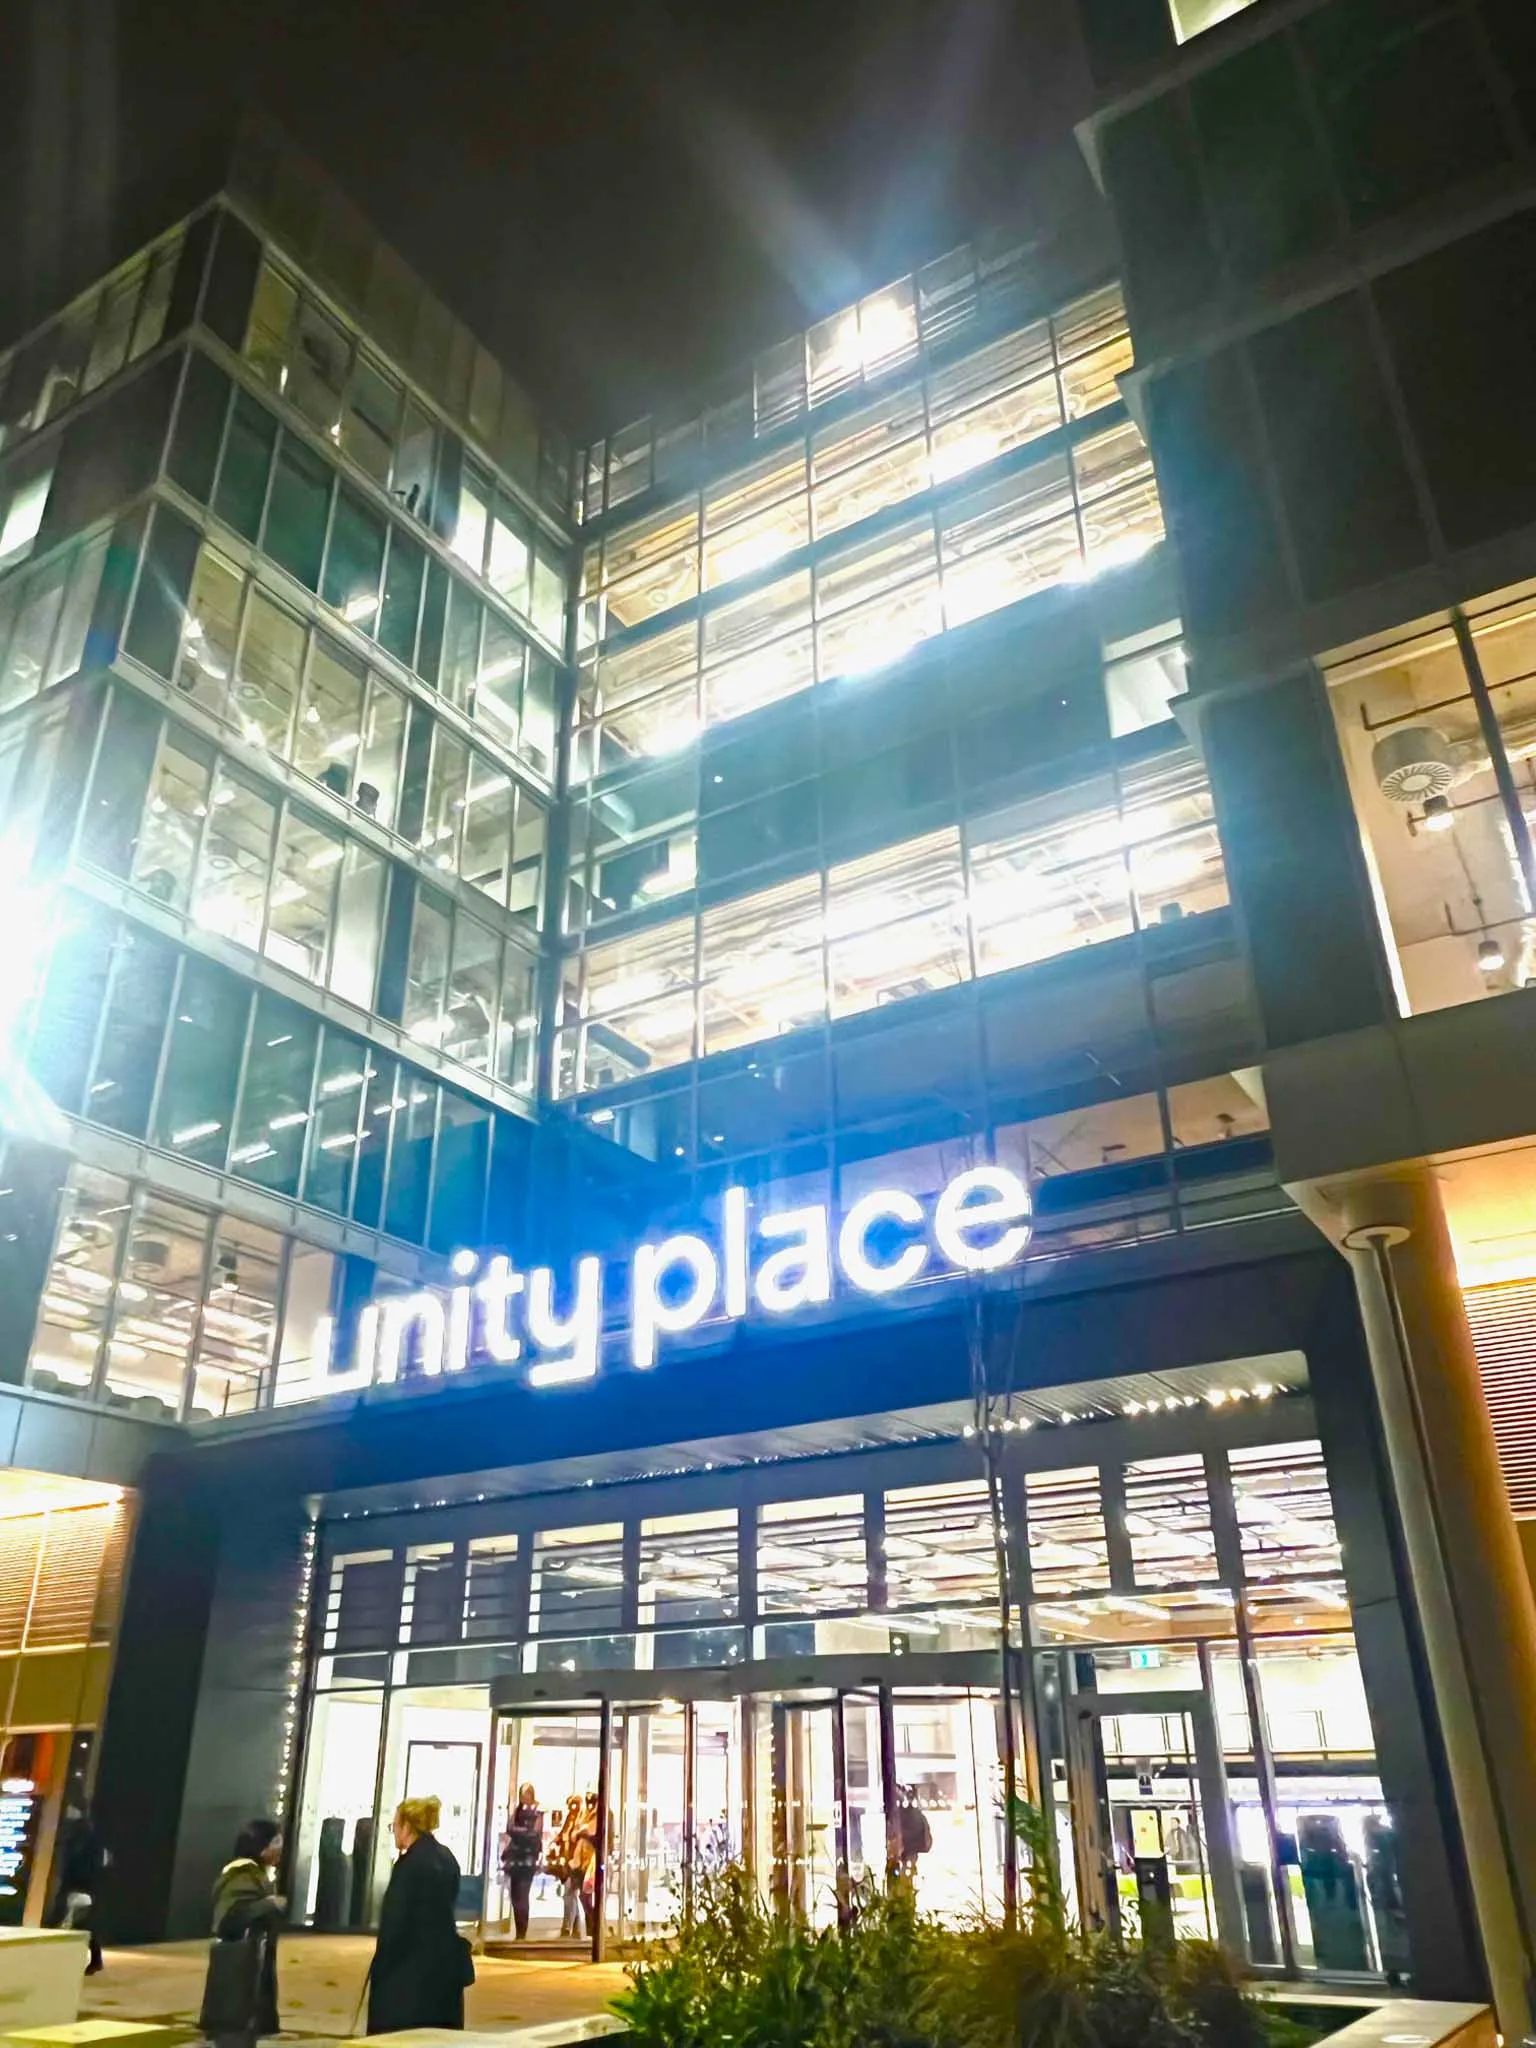 A large building with a sign that says Unity Place.